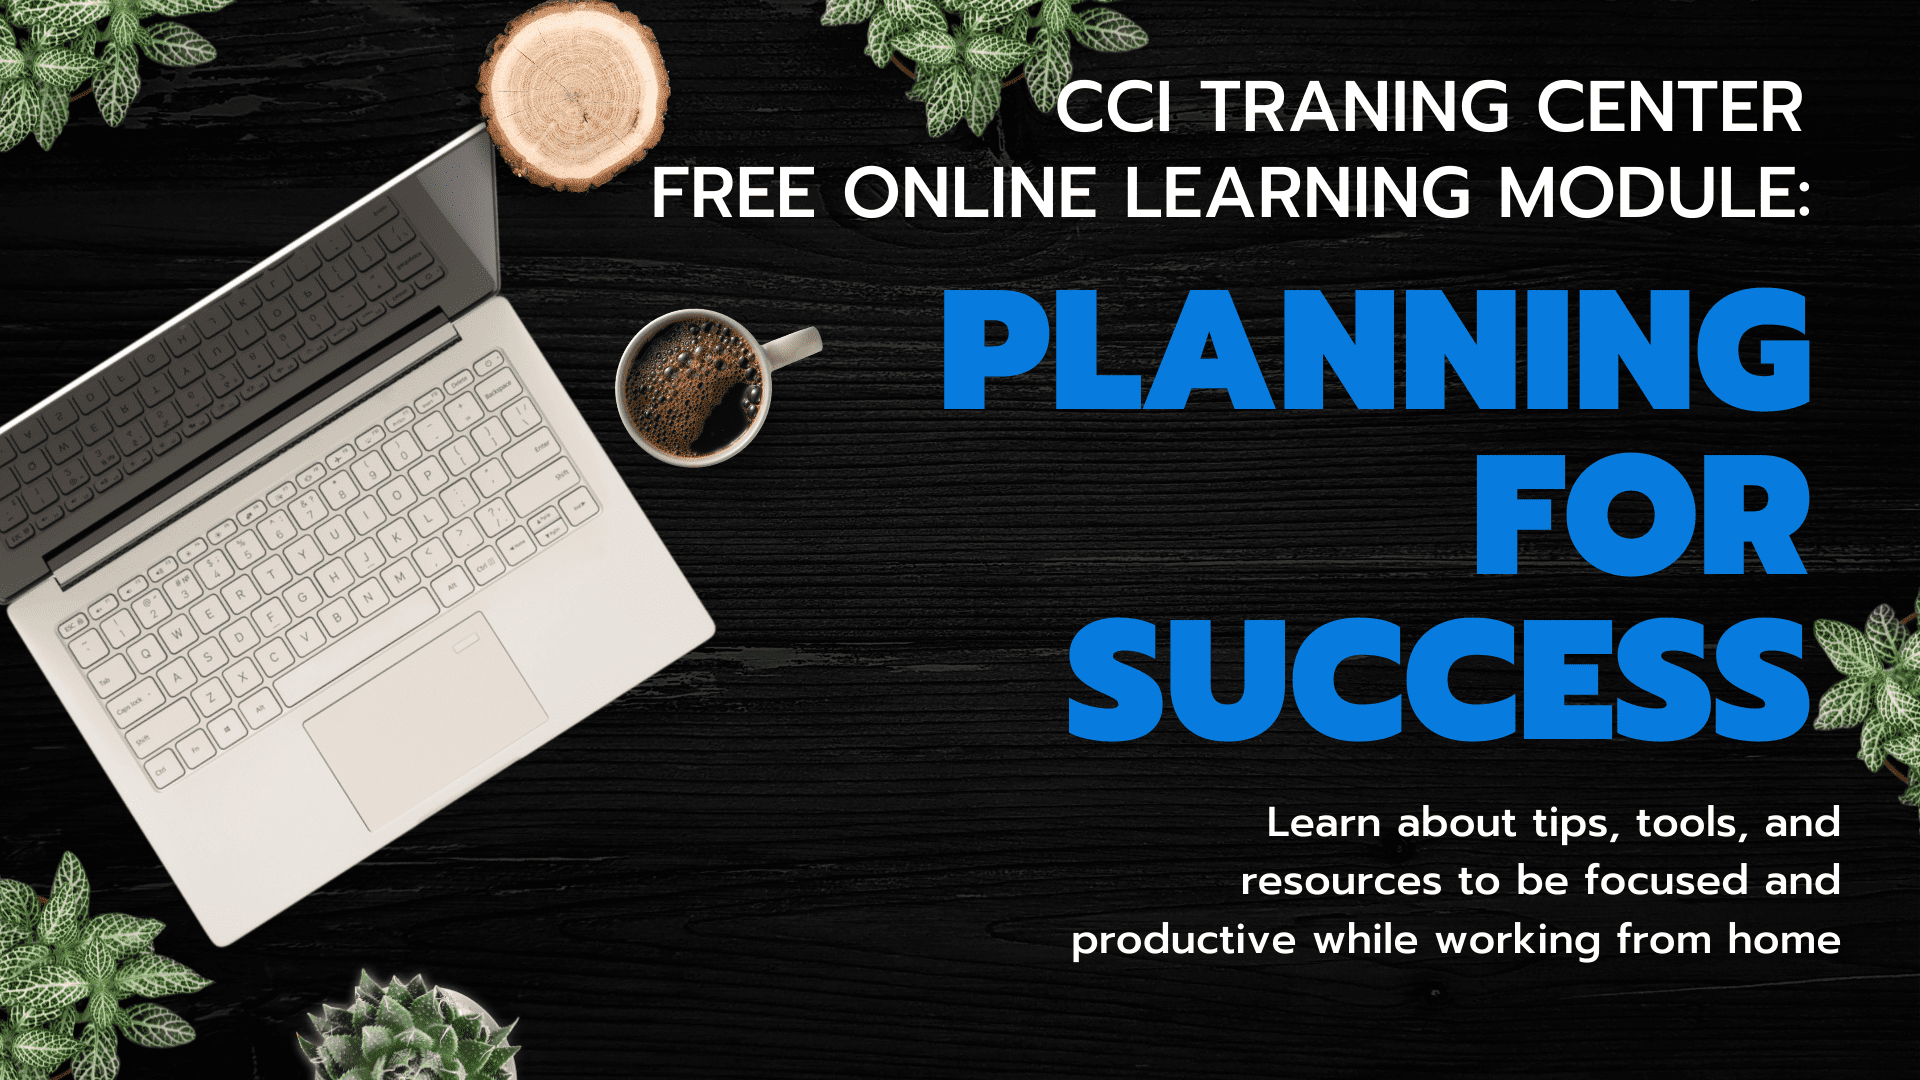 free online course module working from home tips tools resources cci training center